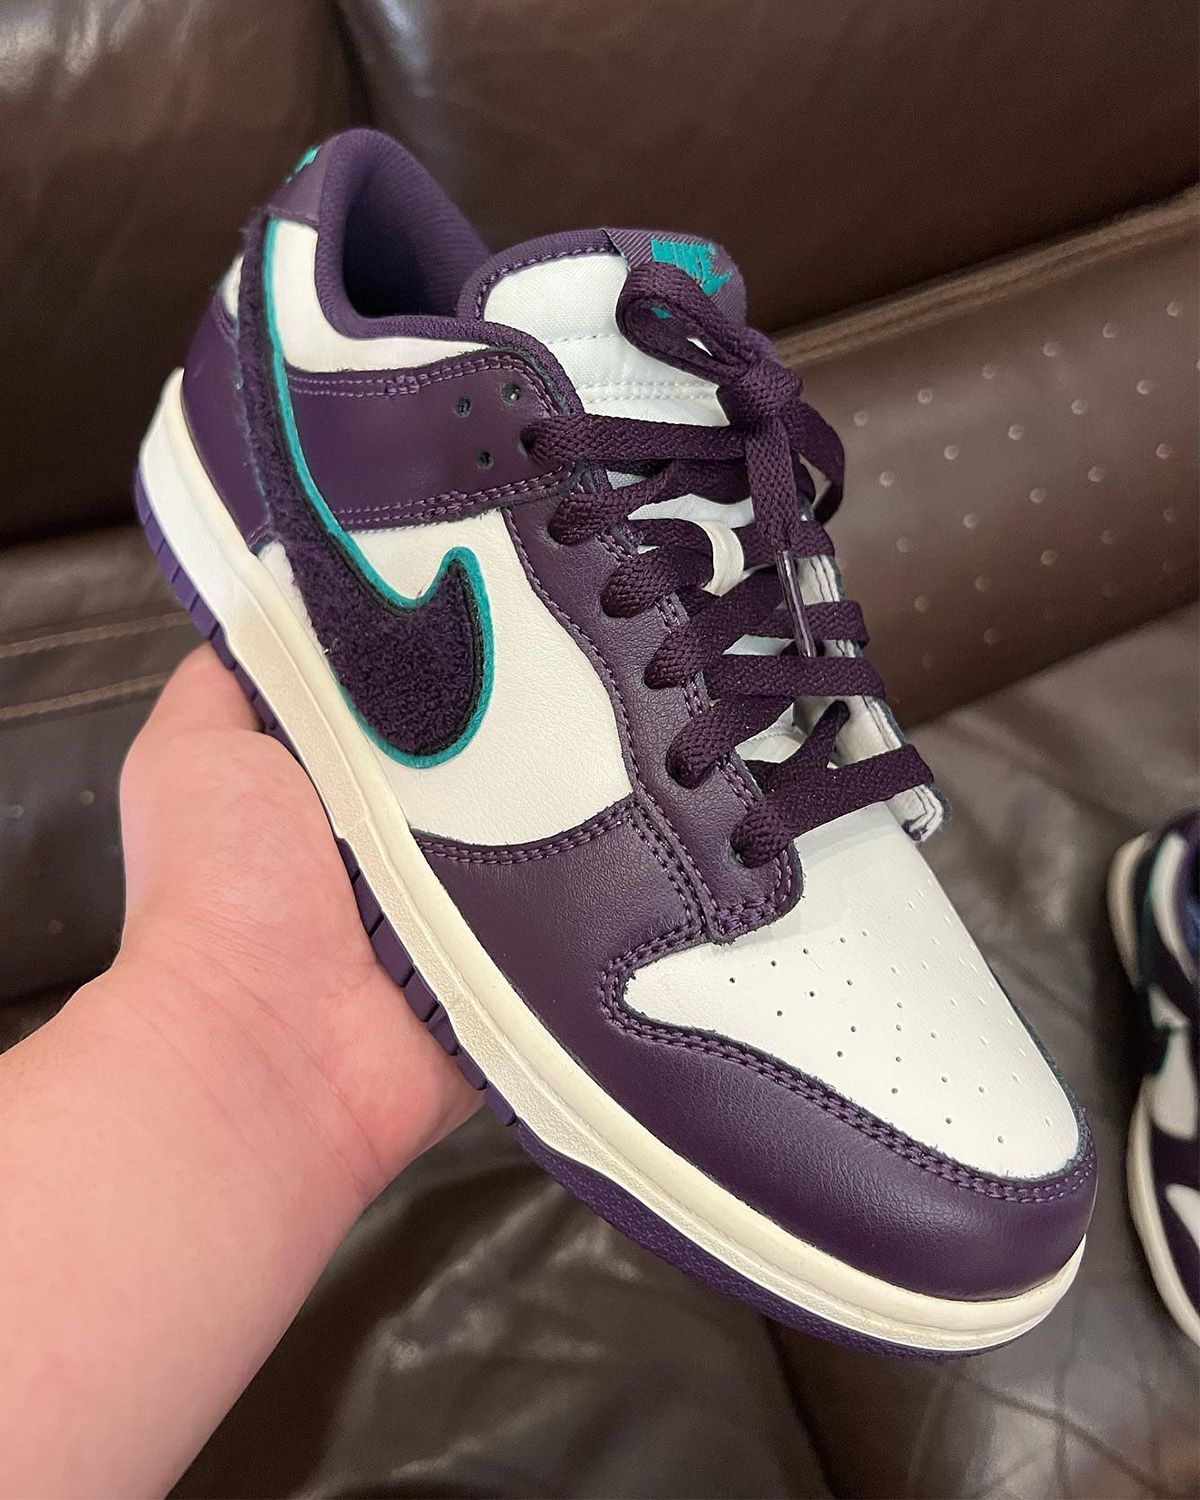 Where to Buy the Nike Dunk Low “Chenille Swoosh” (Grand Purple